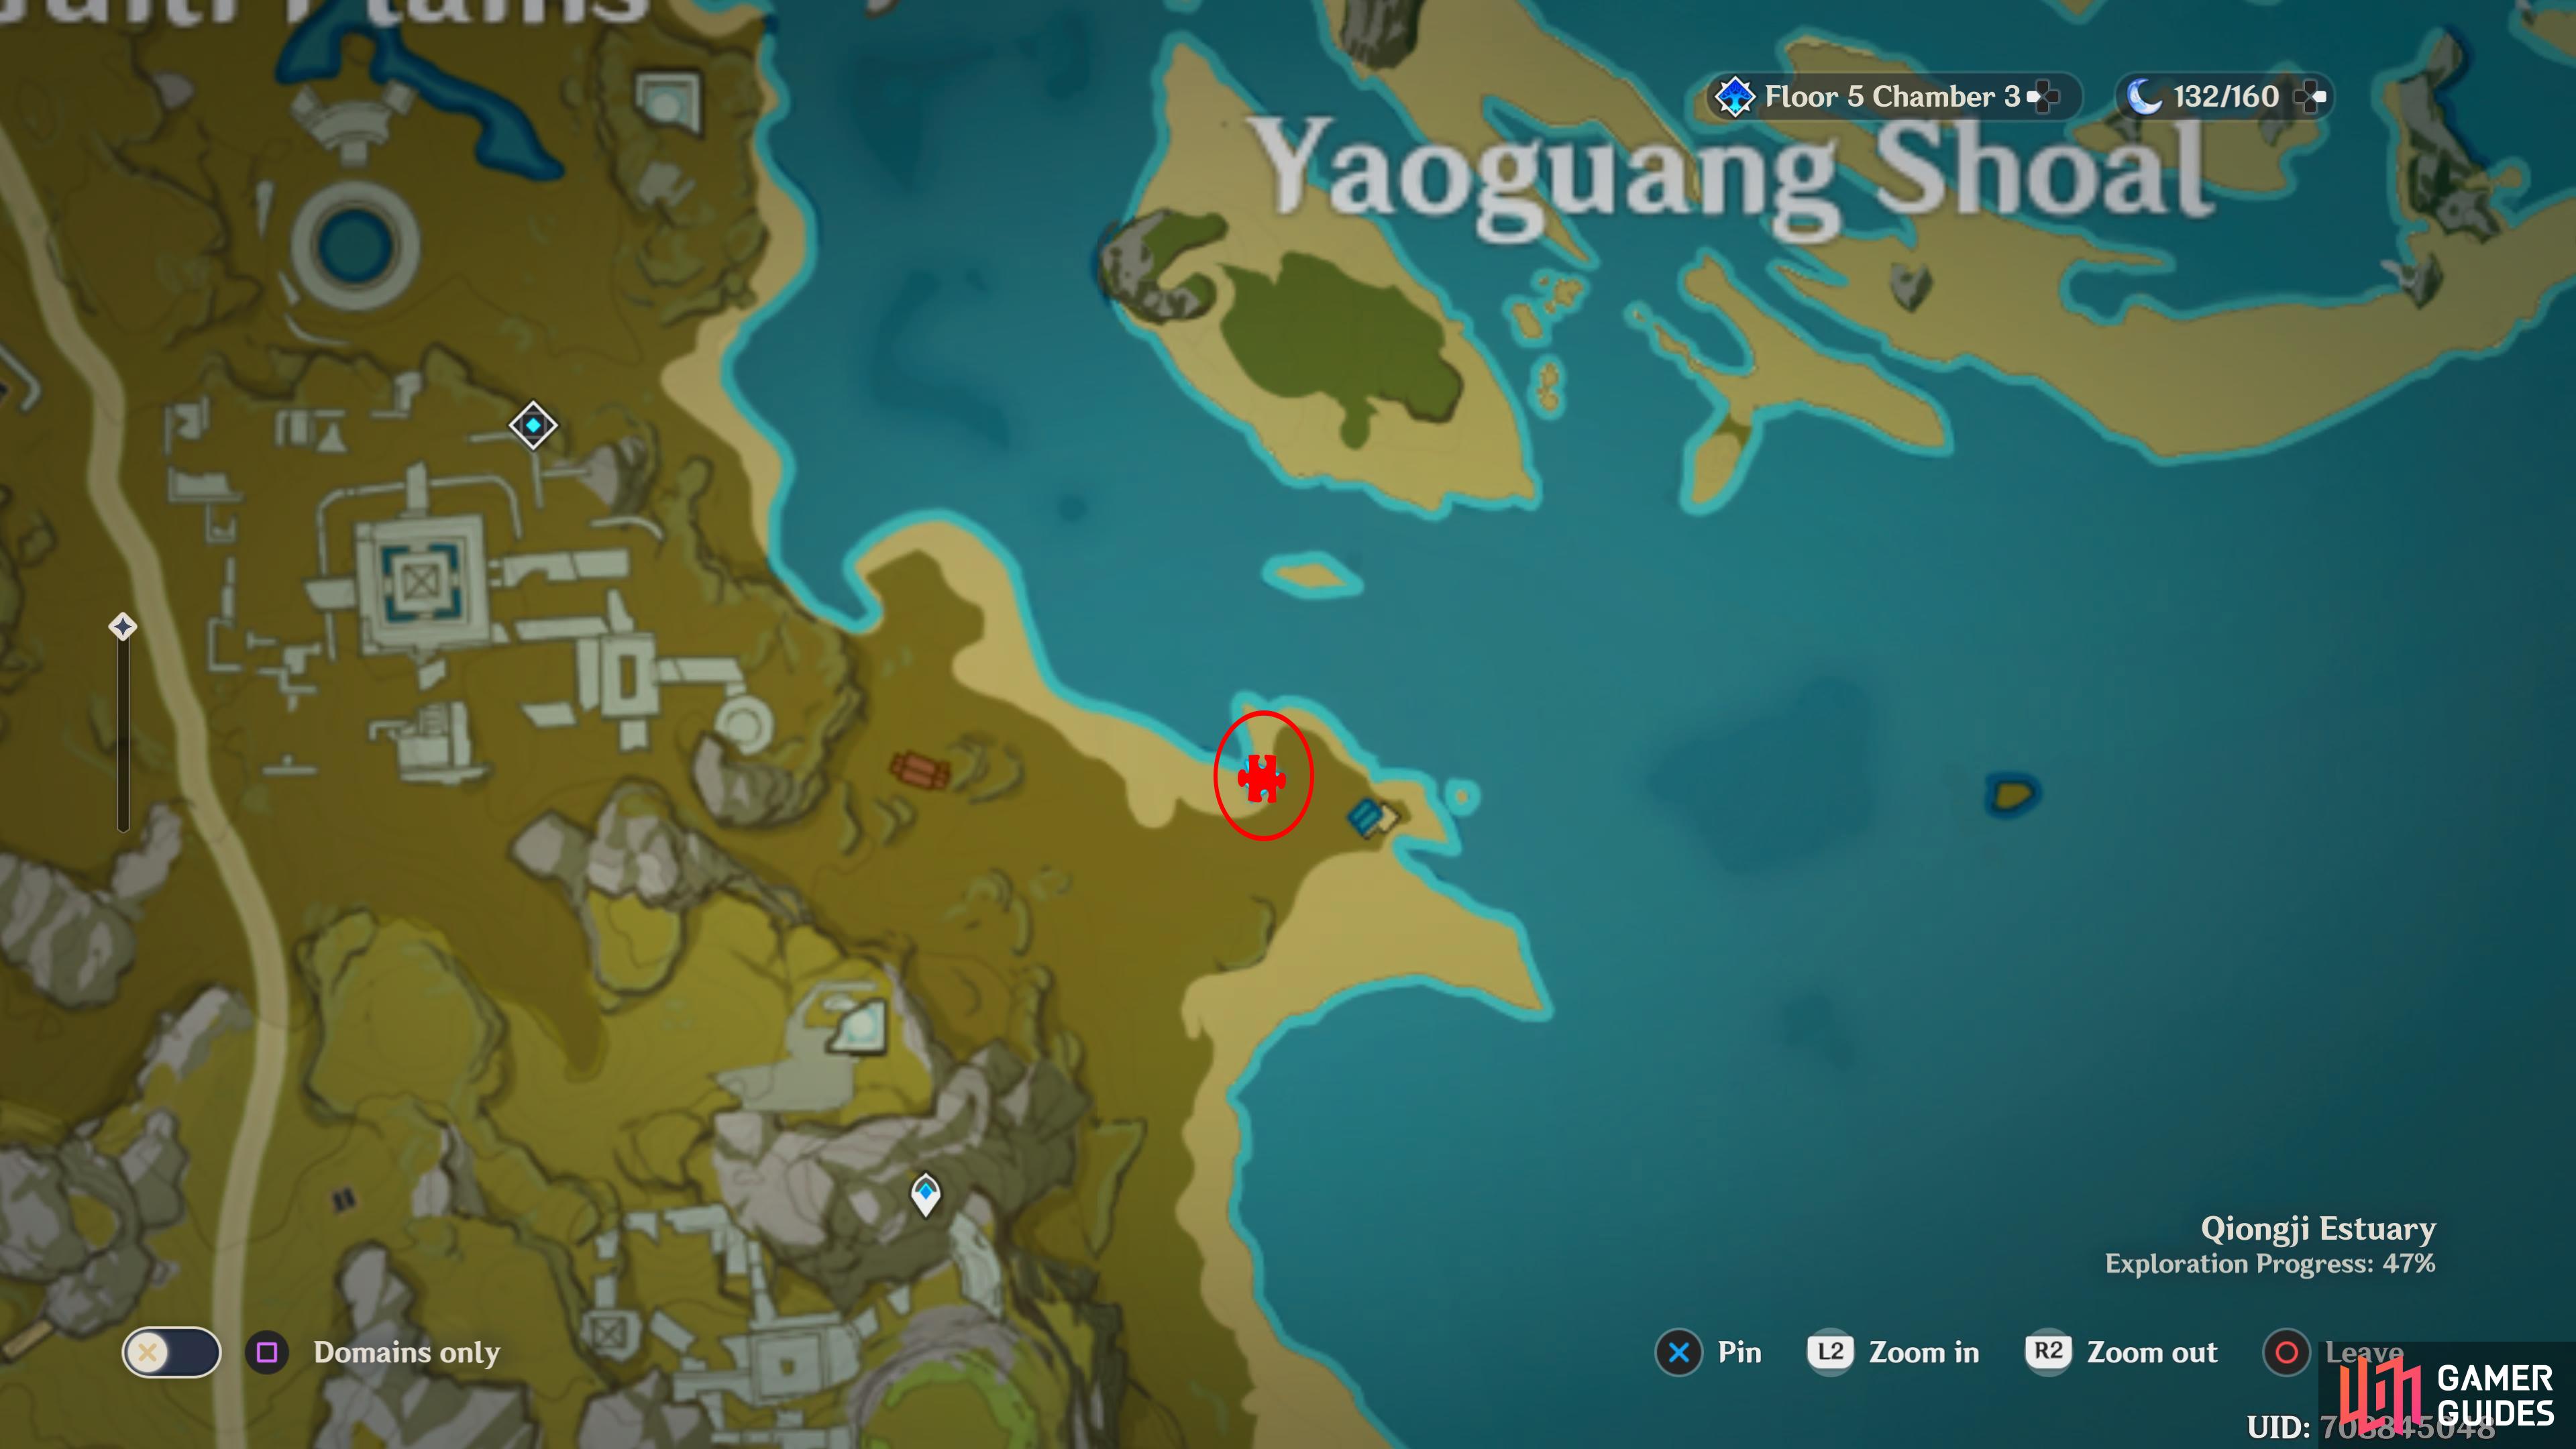 The location of the Secret Treasure is shown in this map